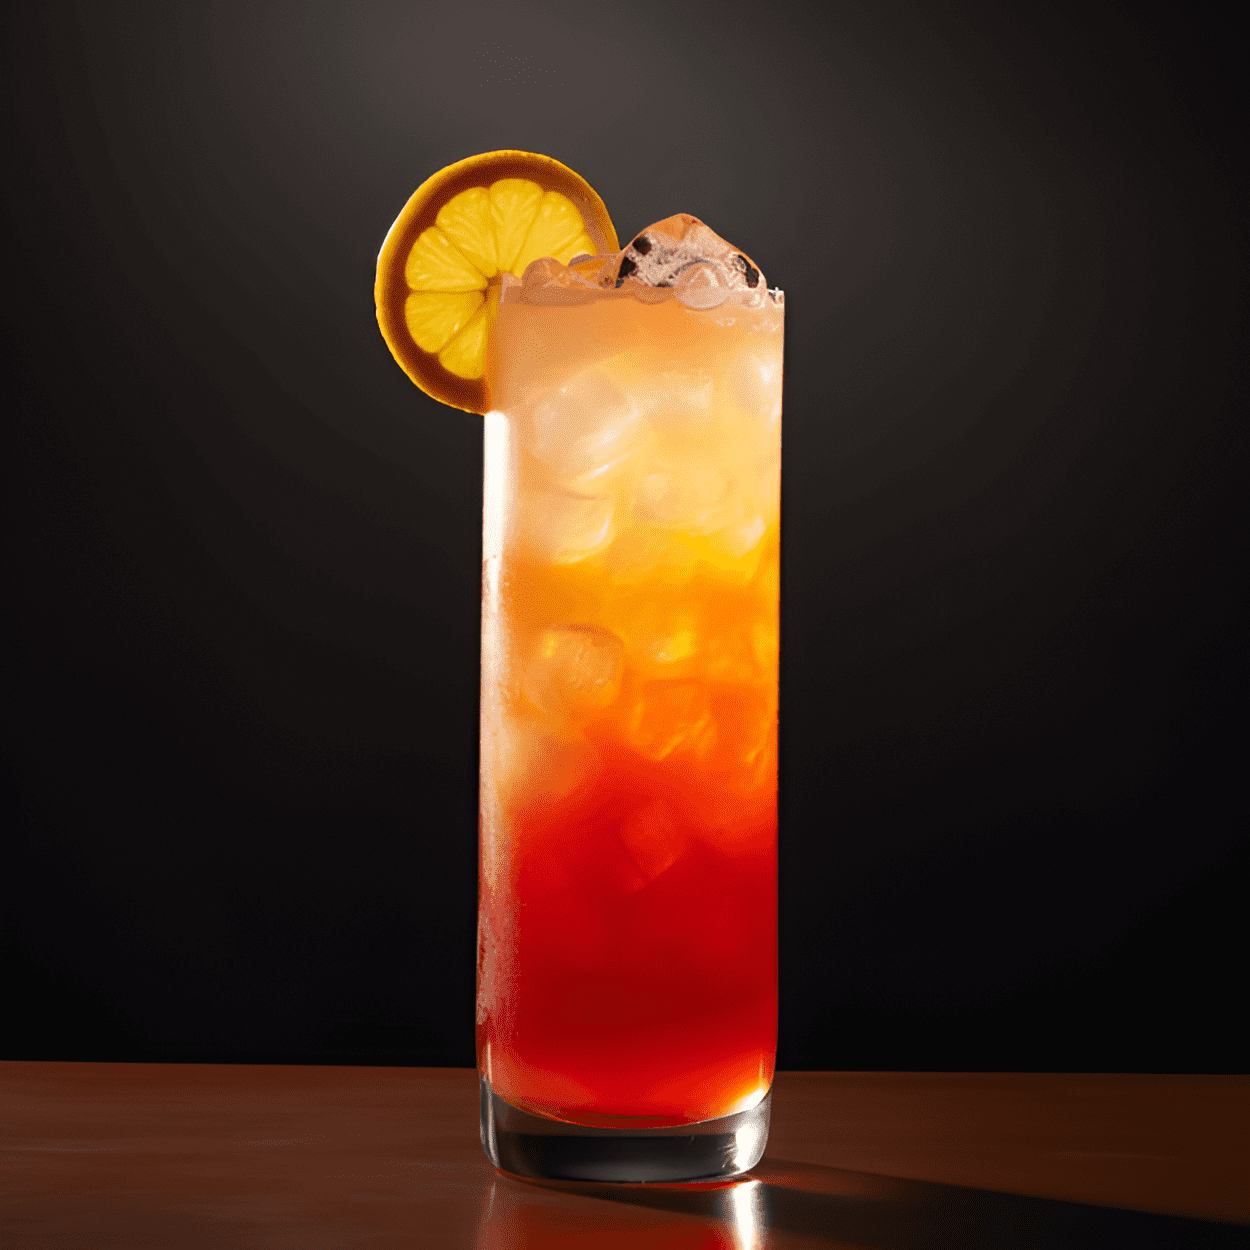 Sundowner Cocktail Recipe - The Sundowner cocktail is a refreshing and well-balanced drink with a sweet and tangy flavor profile. It has a fruity taste, with hints of citrus and tropical fruits, and a slightly bitter undertone from the Campari. The cocktail is light and easy to drink, making it perfect for sipping on a warm summer evening.